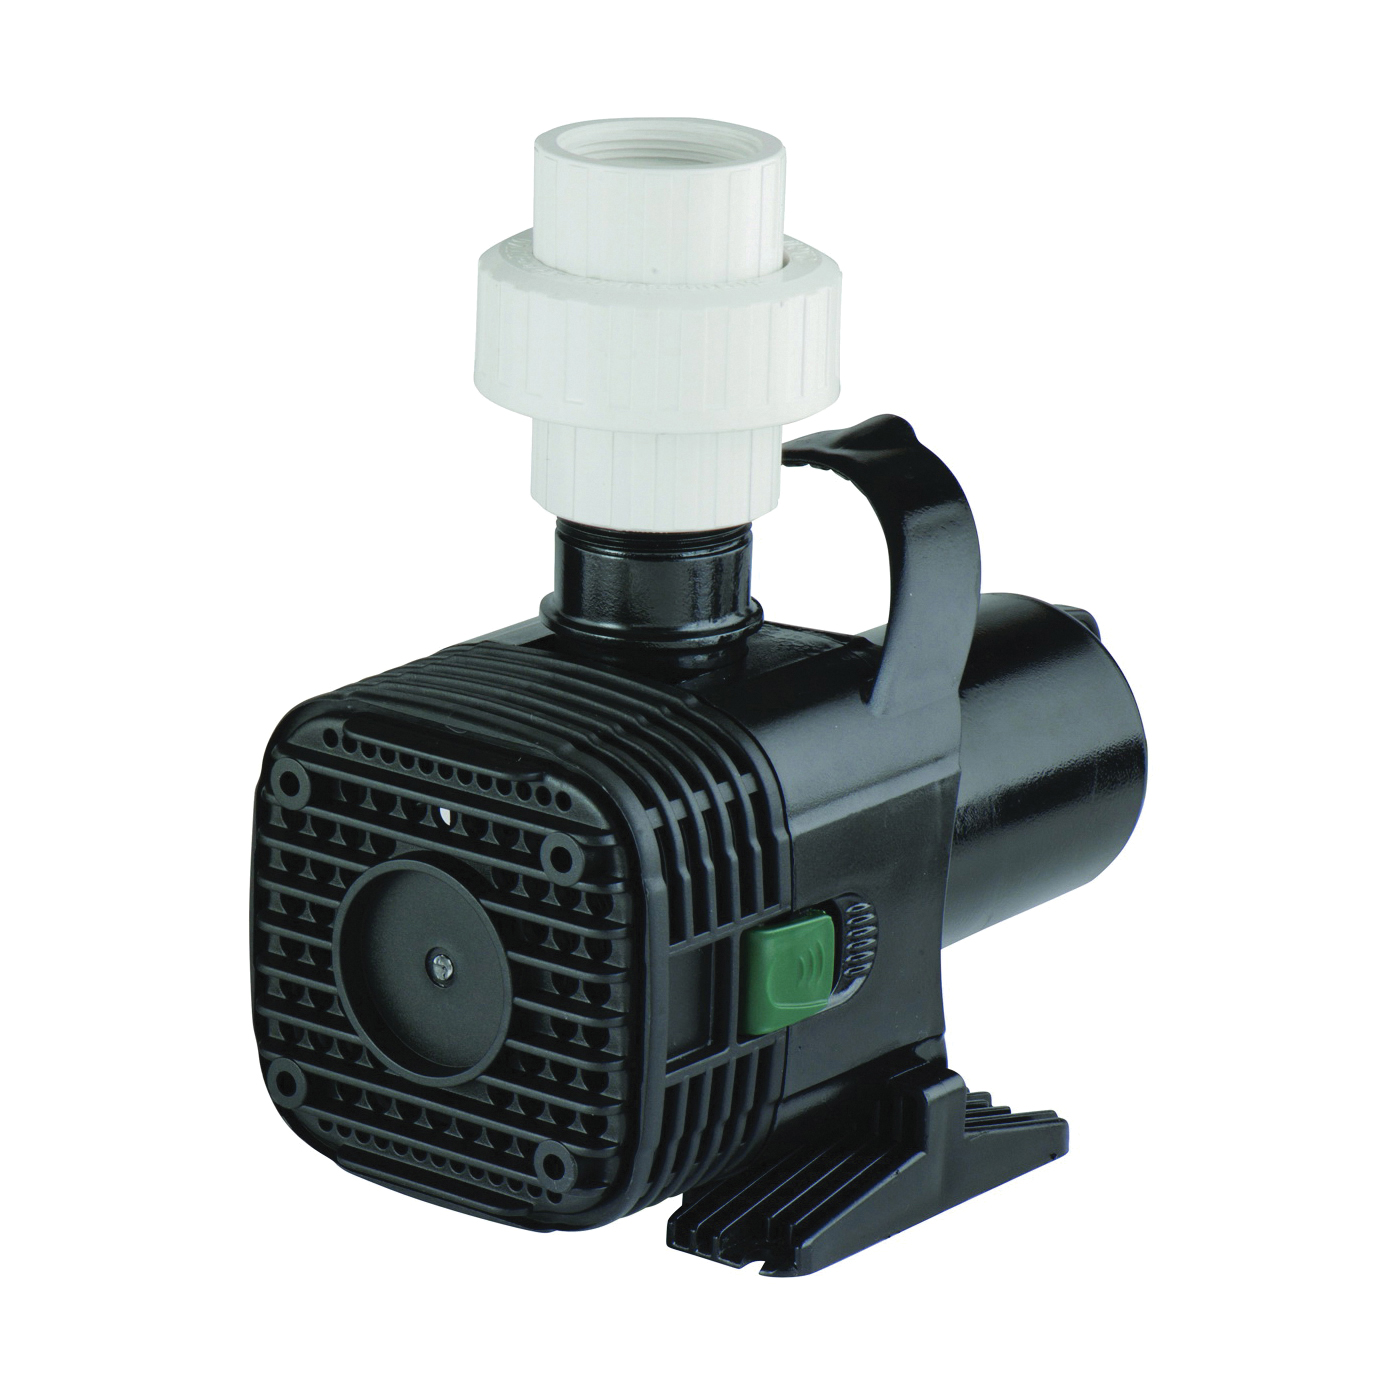 566724 Wet Rotor Pump, 1.3 A, 115 V, 1/2 in Connection, 1295 gph, Horizontal, Vertical Mounting